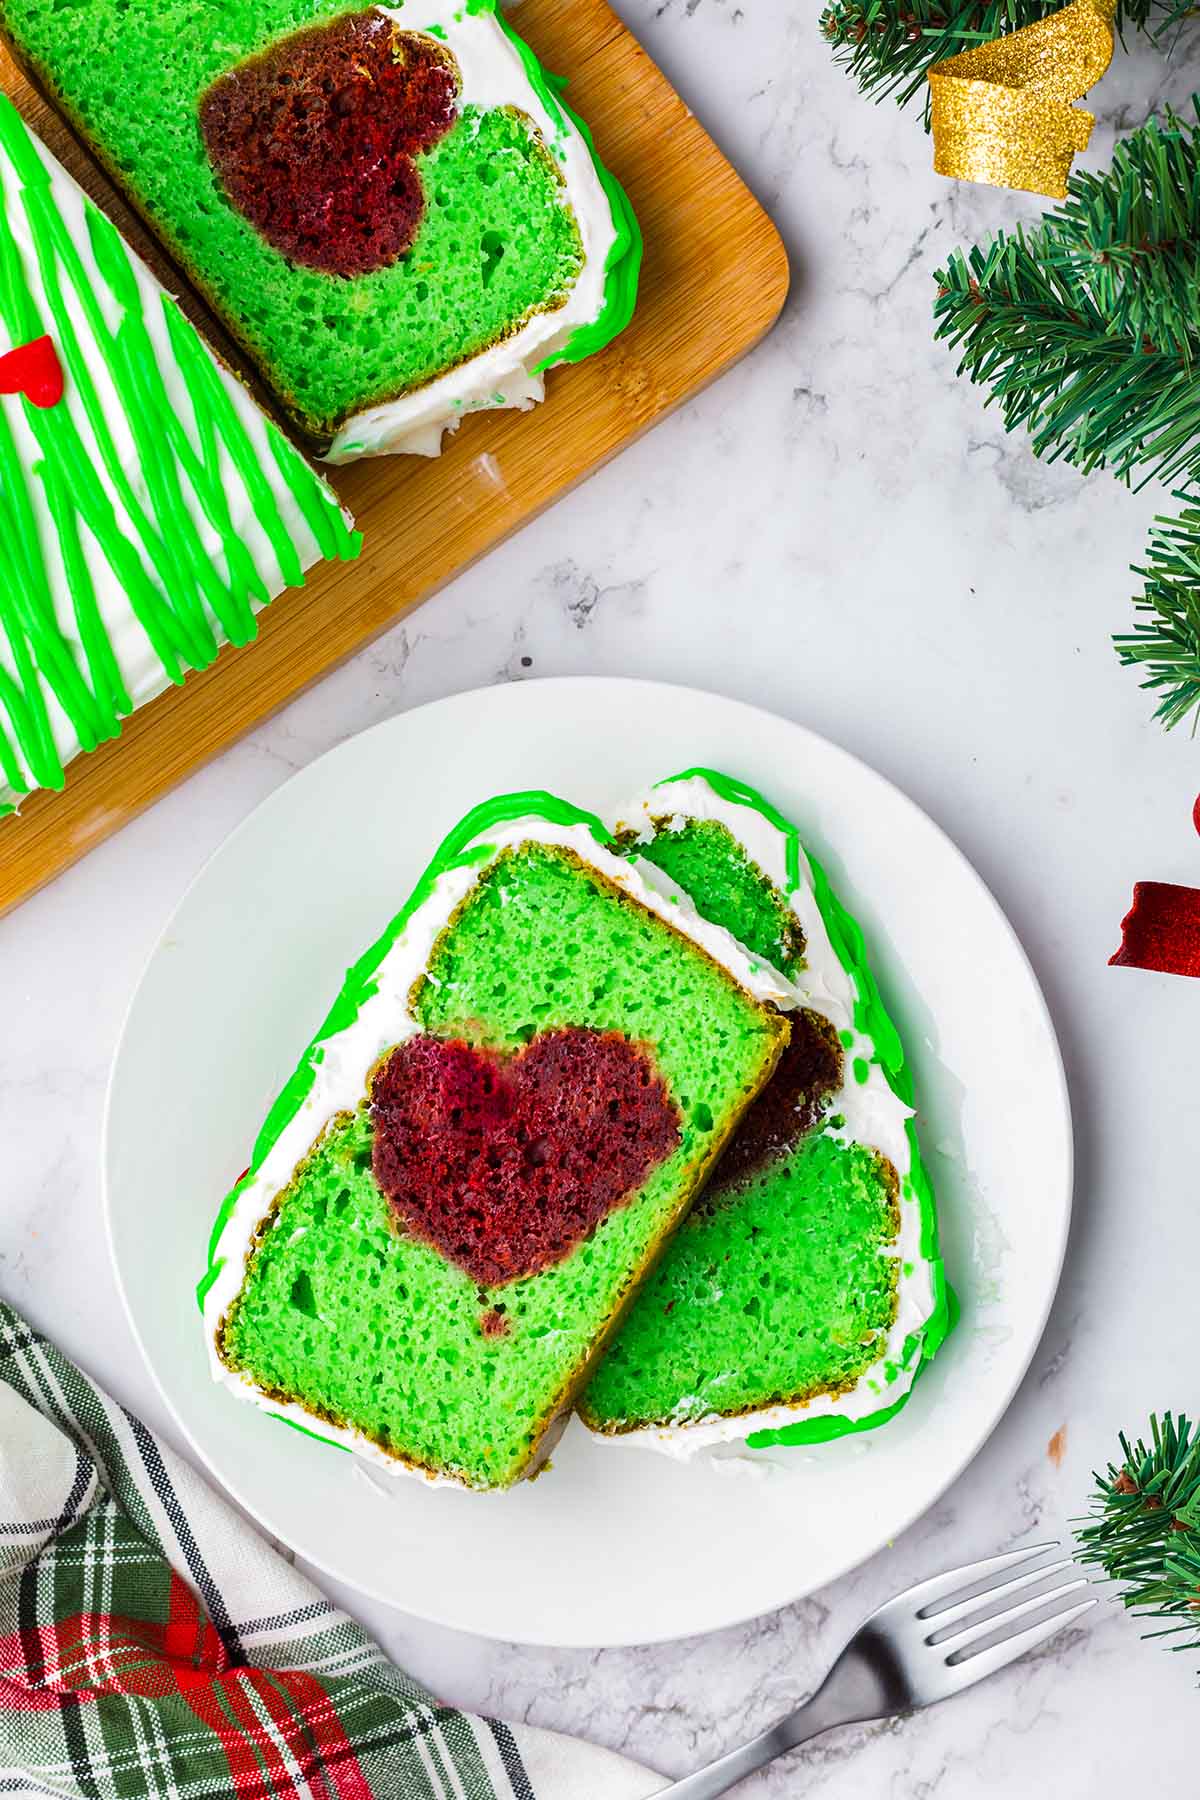 2 slices of Grinch Cake on a white plate.